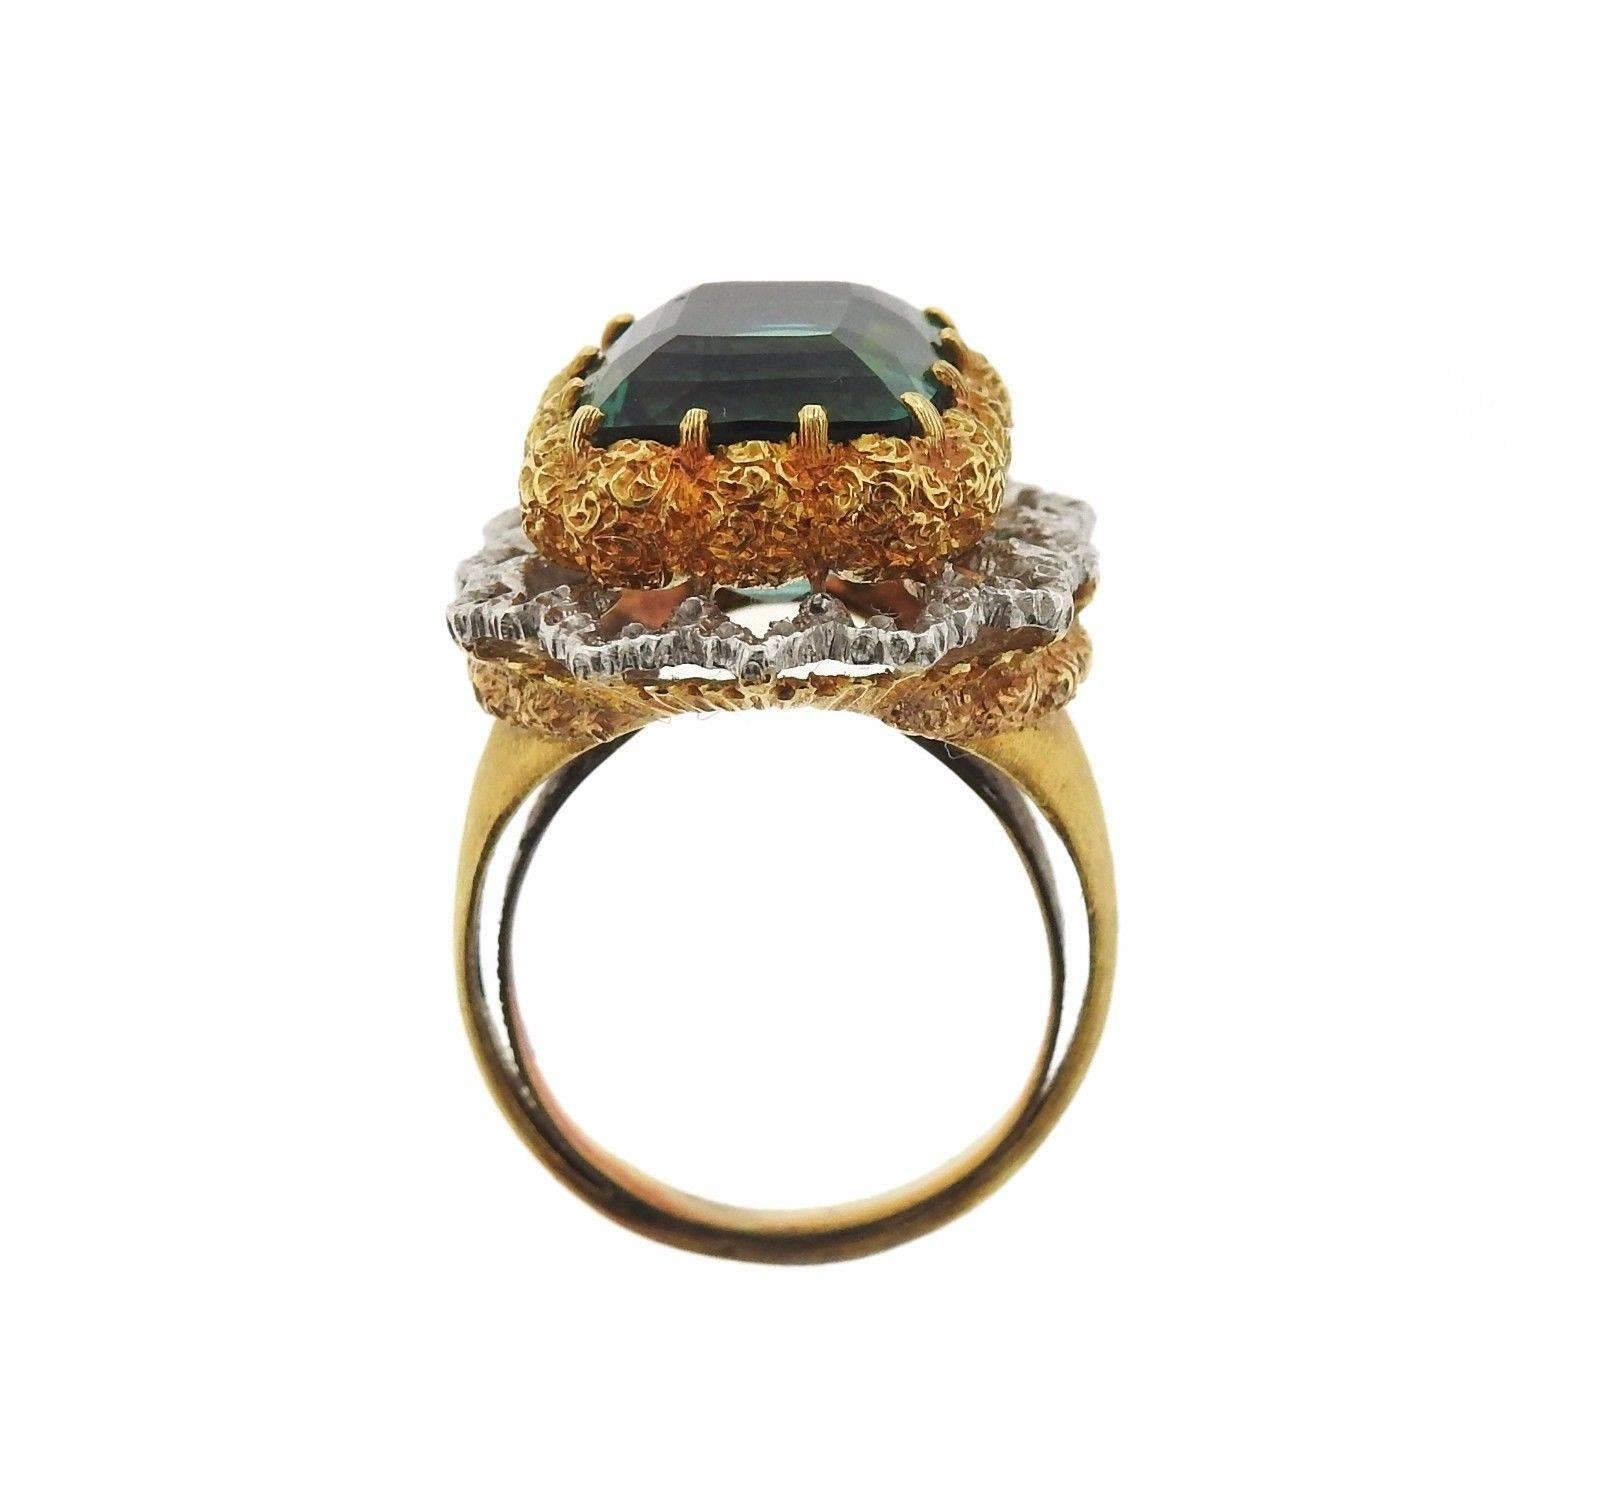 An 18k gold ring set with a tourmaline (11mm x 10mm).  The ring is a size 5.75 and is 18mm wide. The weight of the ring is 11.5 grams.  Marked: Buccellati, Italy, K18.